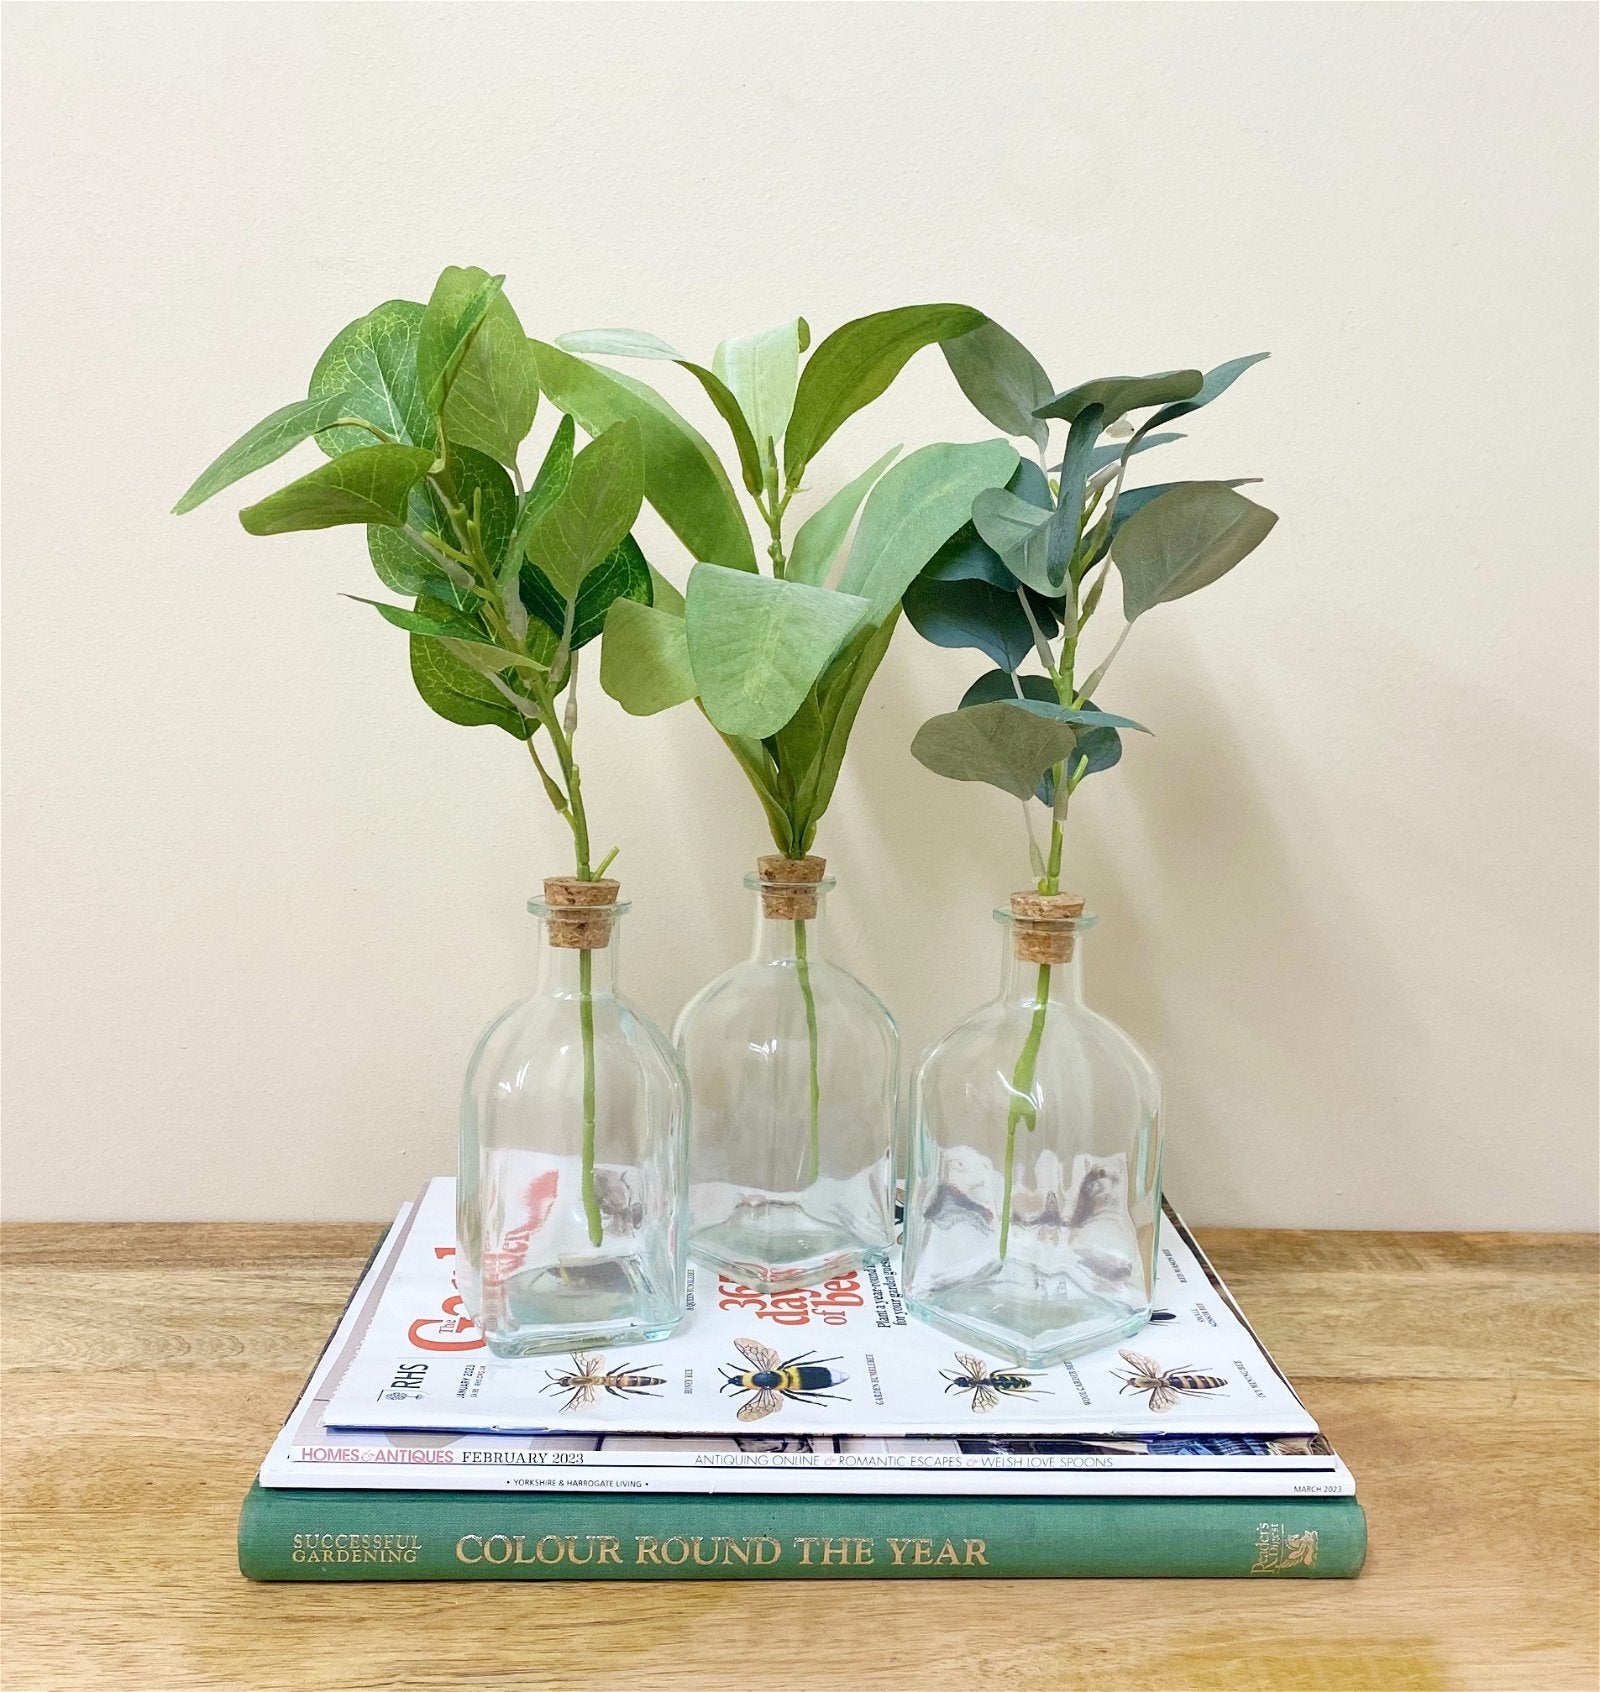 View Set of Three Artificial Leaf In Vase information